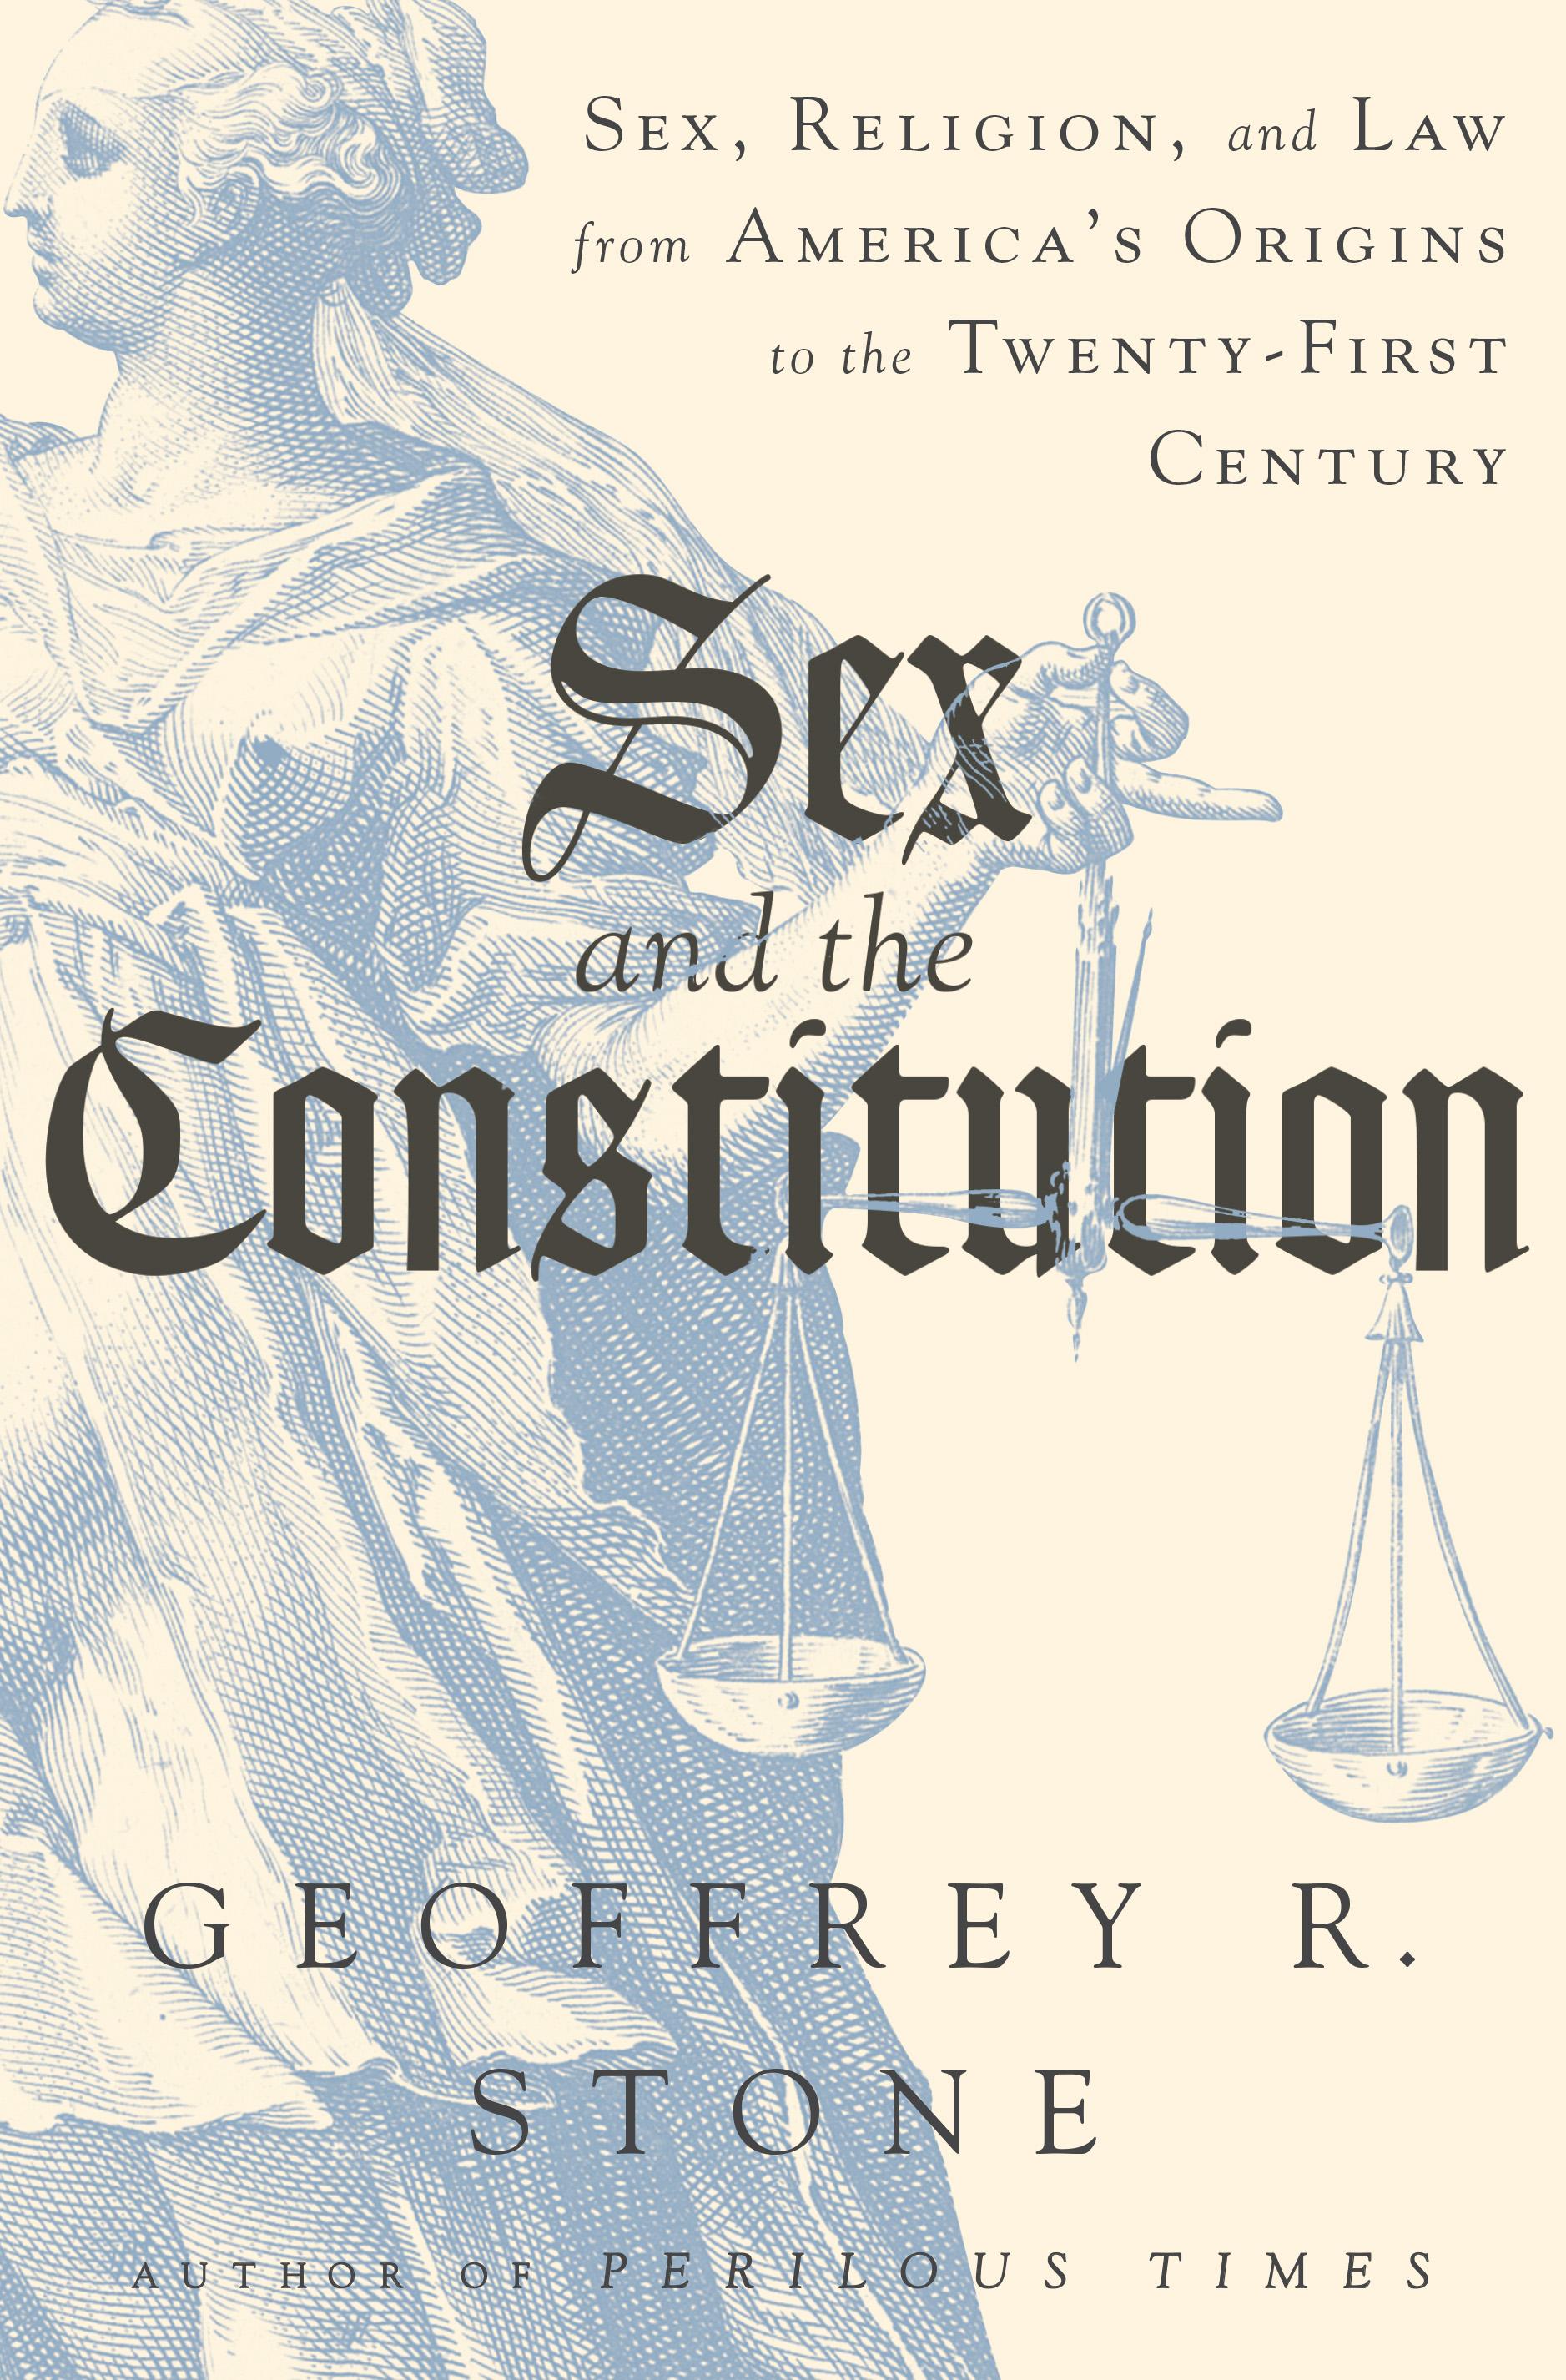 book cover image for Sex and the constitution featuring the title in black text over a blue image of lady justice on a yellow background